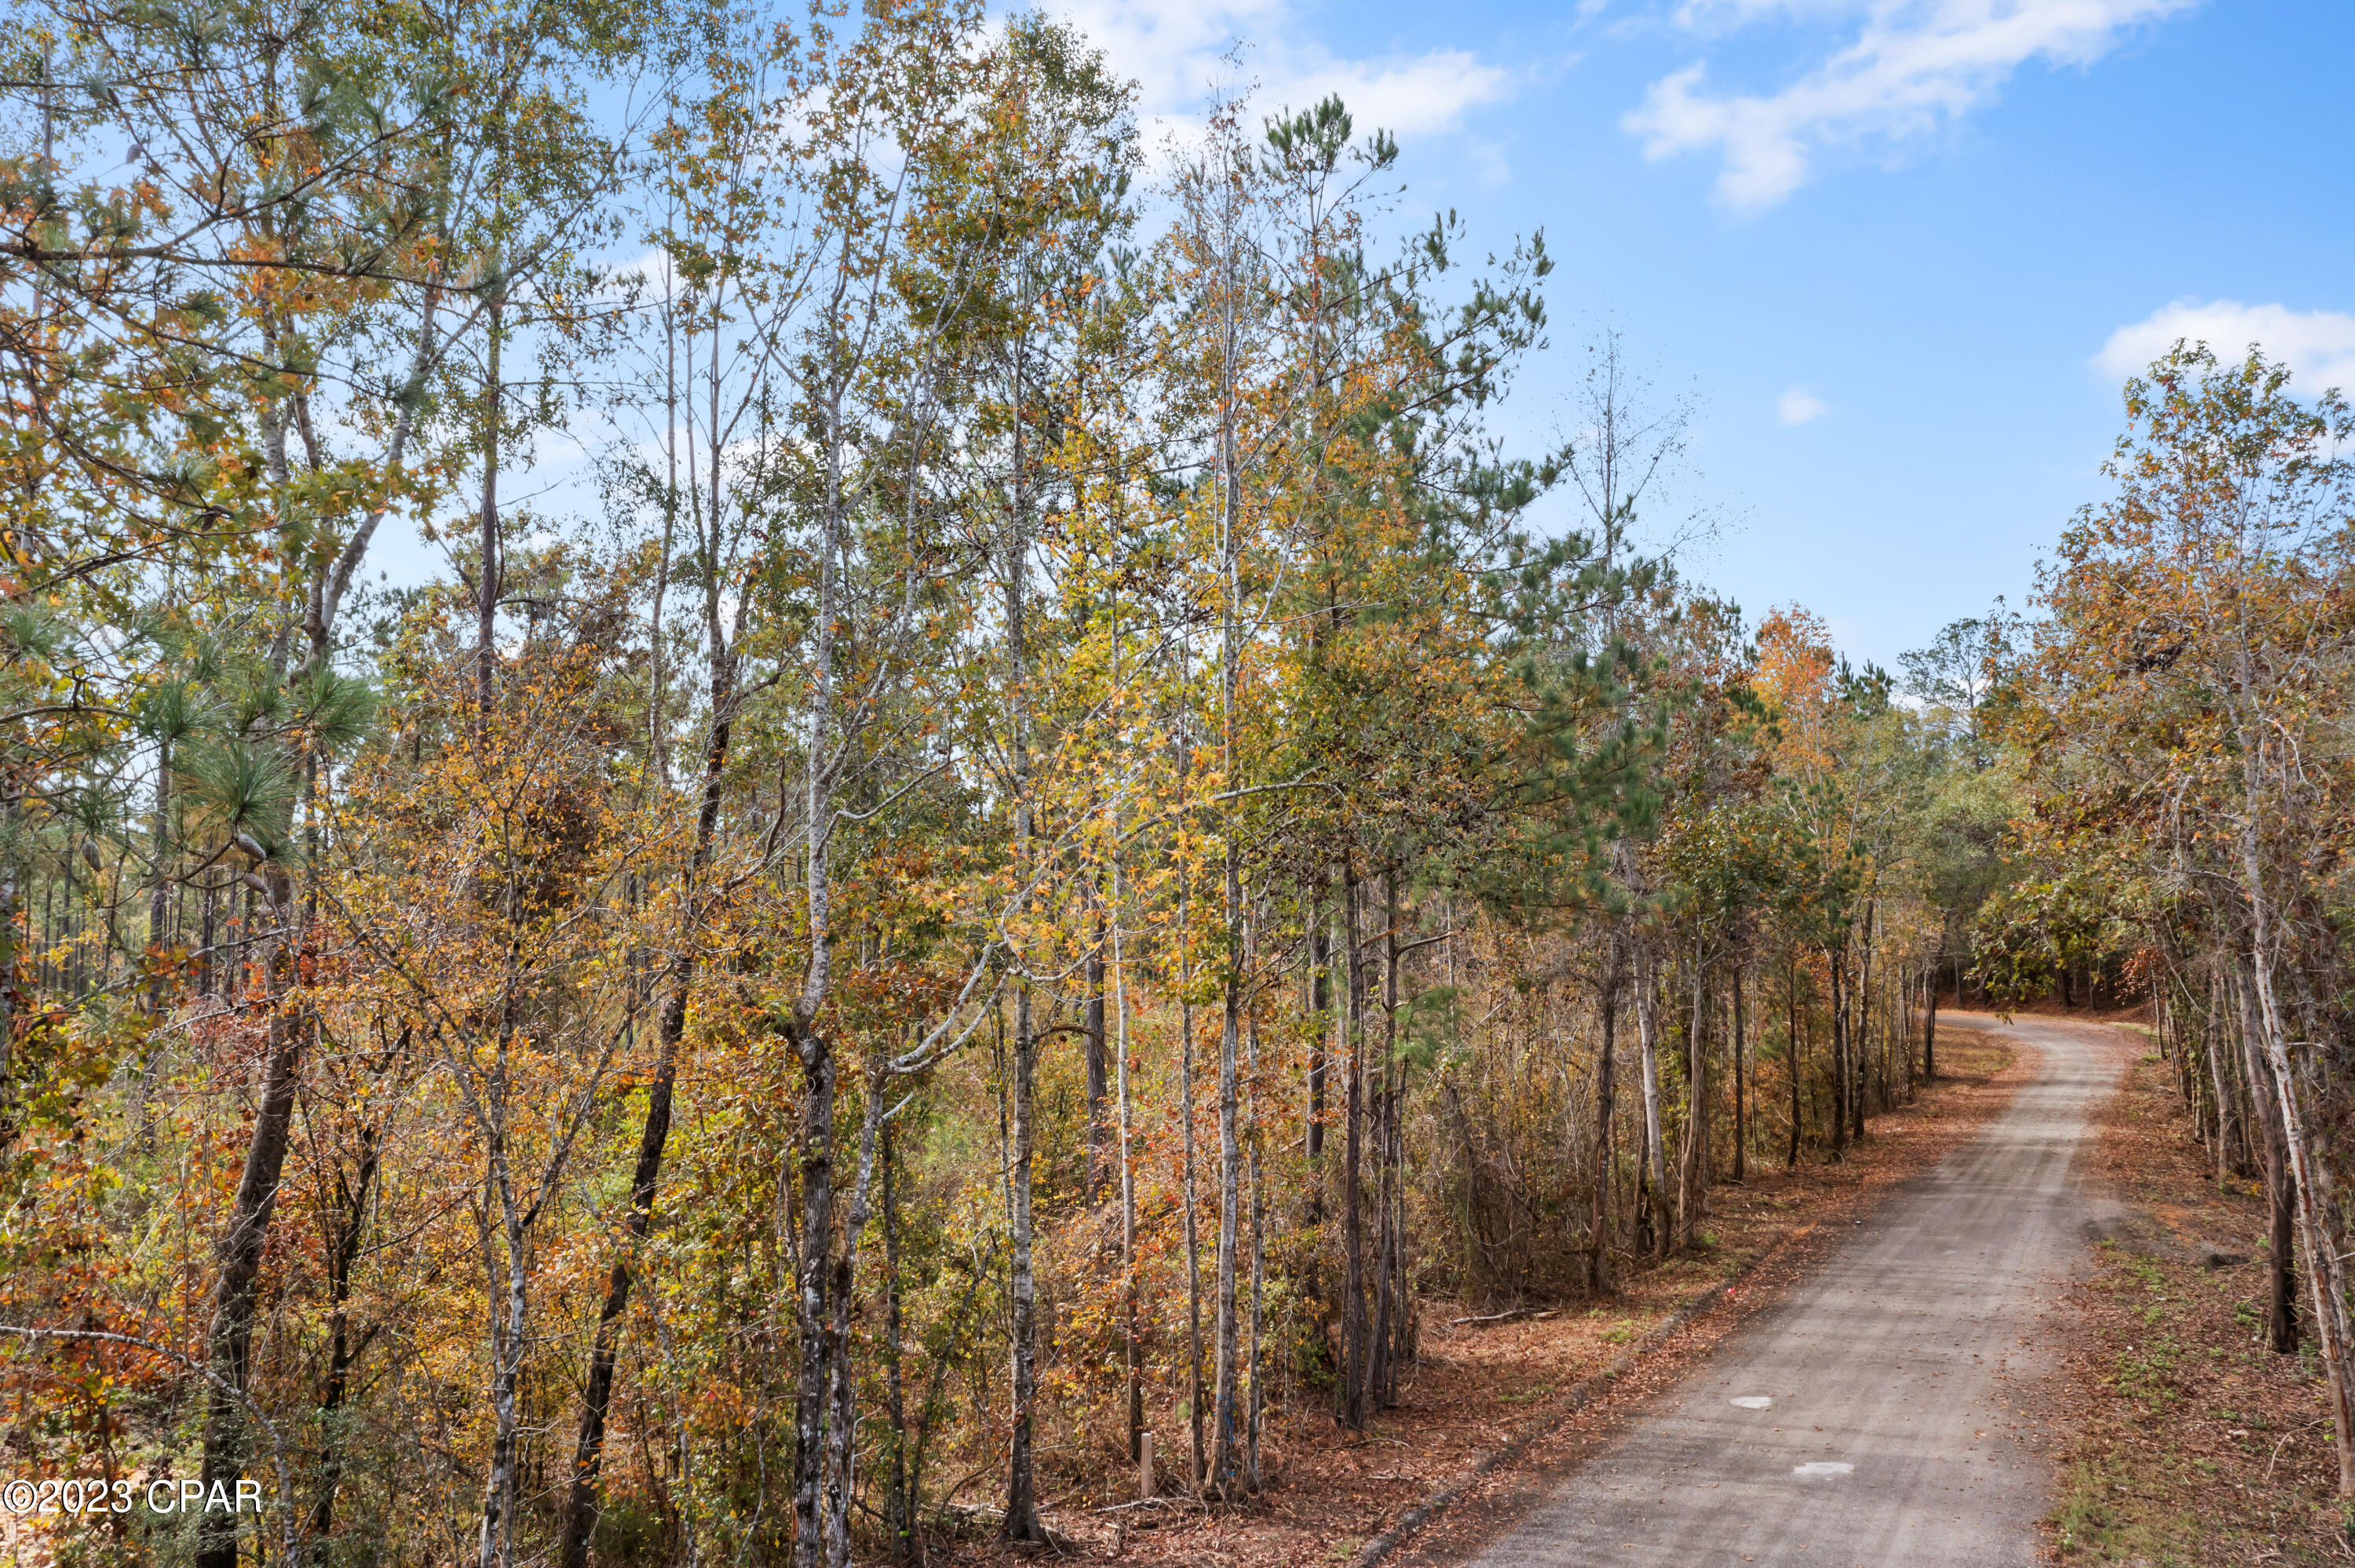 Beautiful, peaceful, buildable acreage located approximately 5 miles from I-10 exit in Ponce De Leon, 15 miles to I-10 exit in Defuniak Springs. High and dry, lightly wooded.